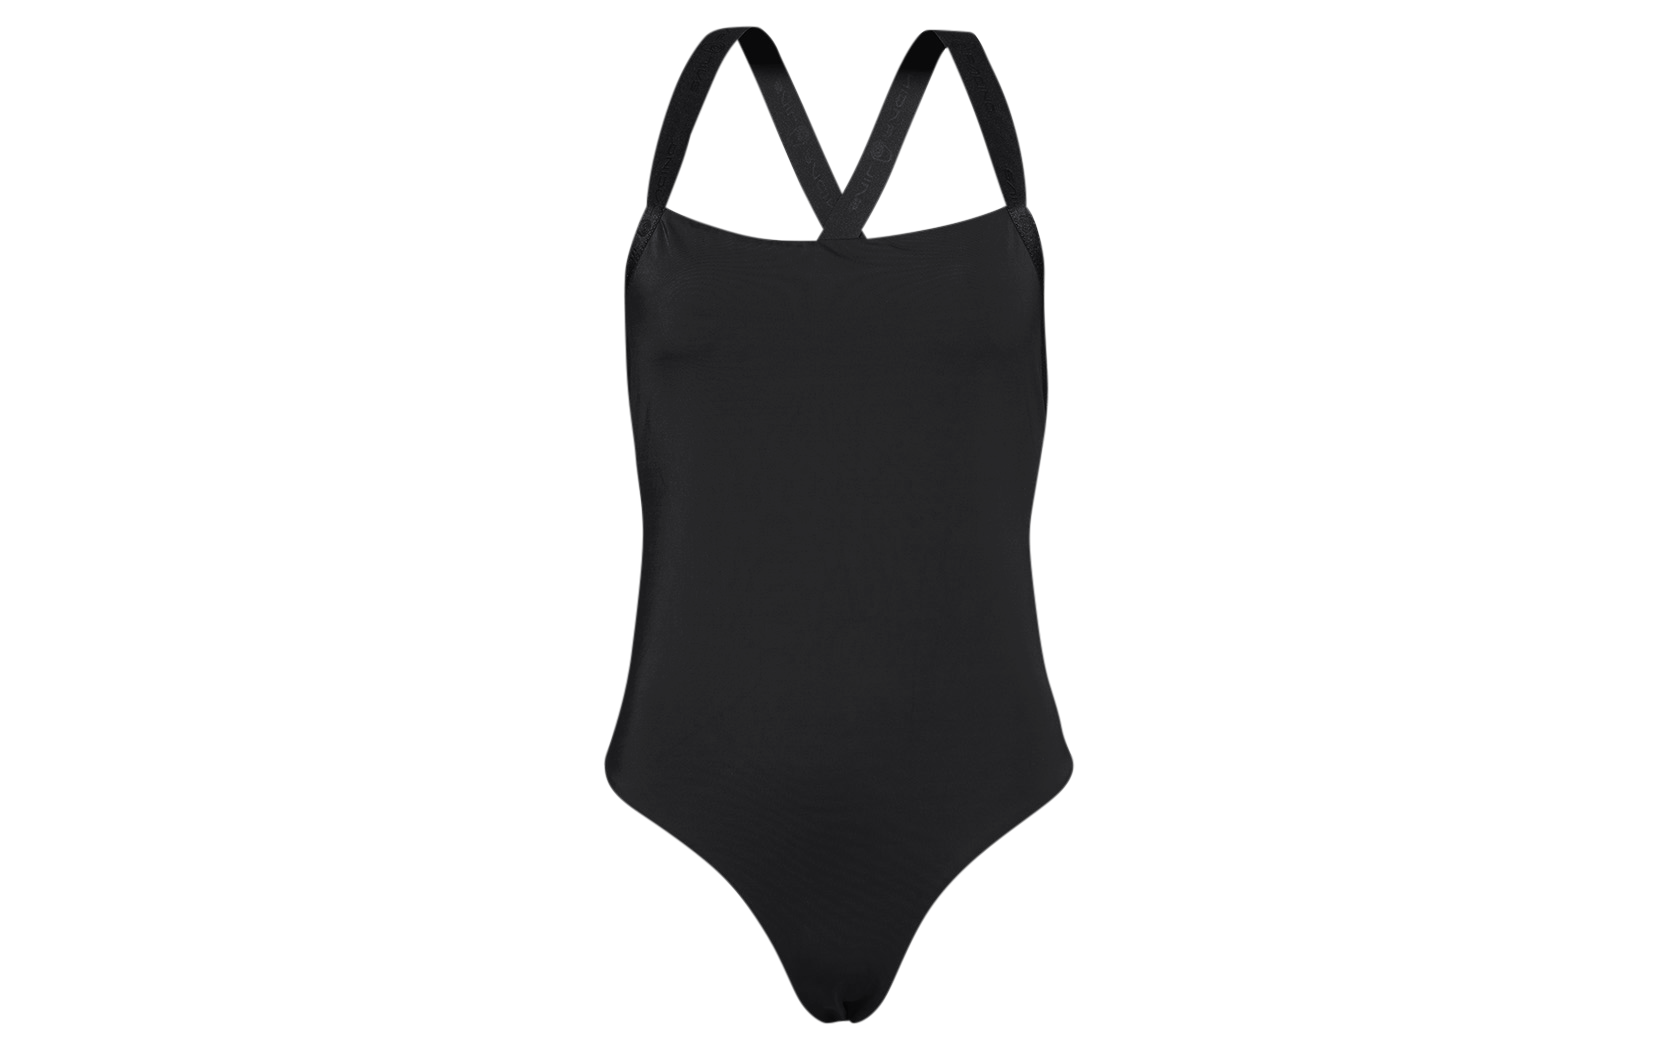 W RACE SWIMSUIT | Sail Racing Official